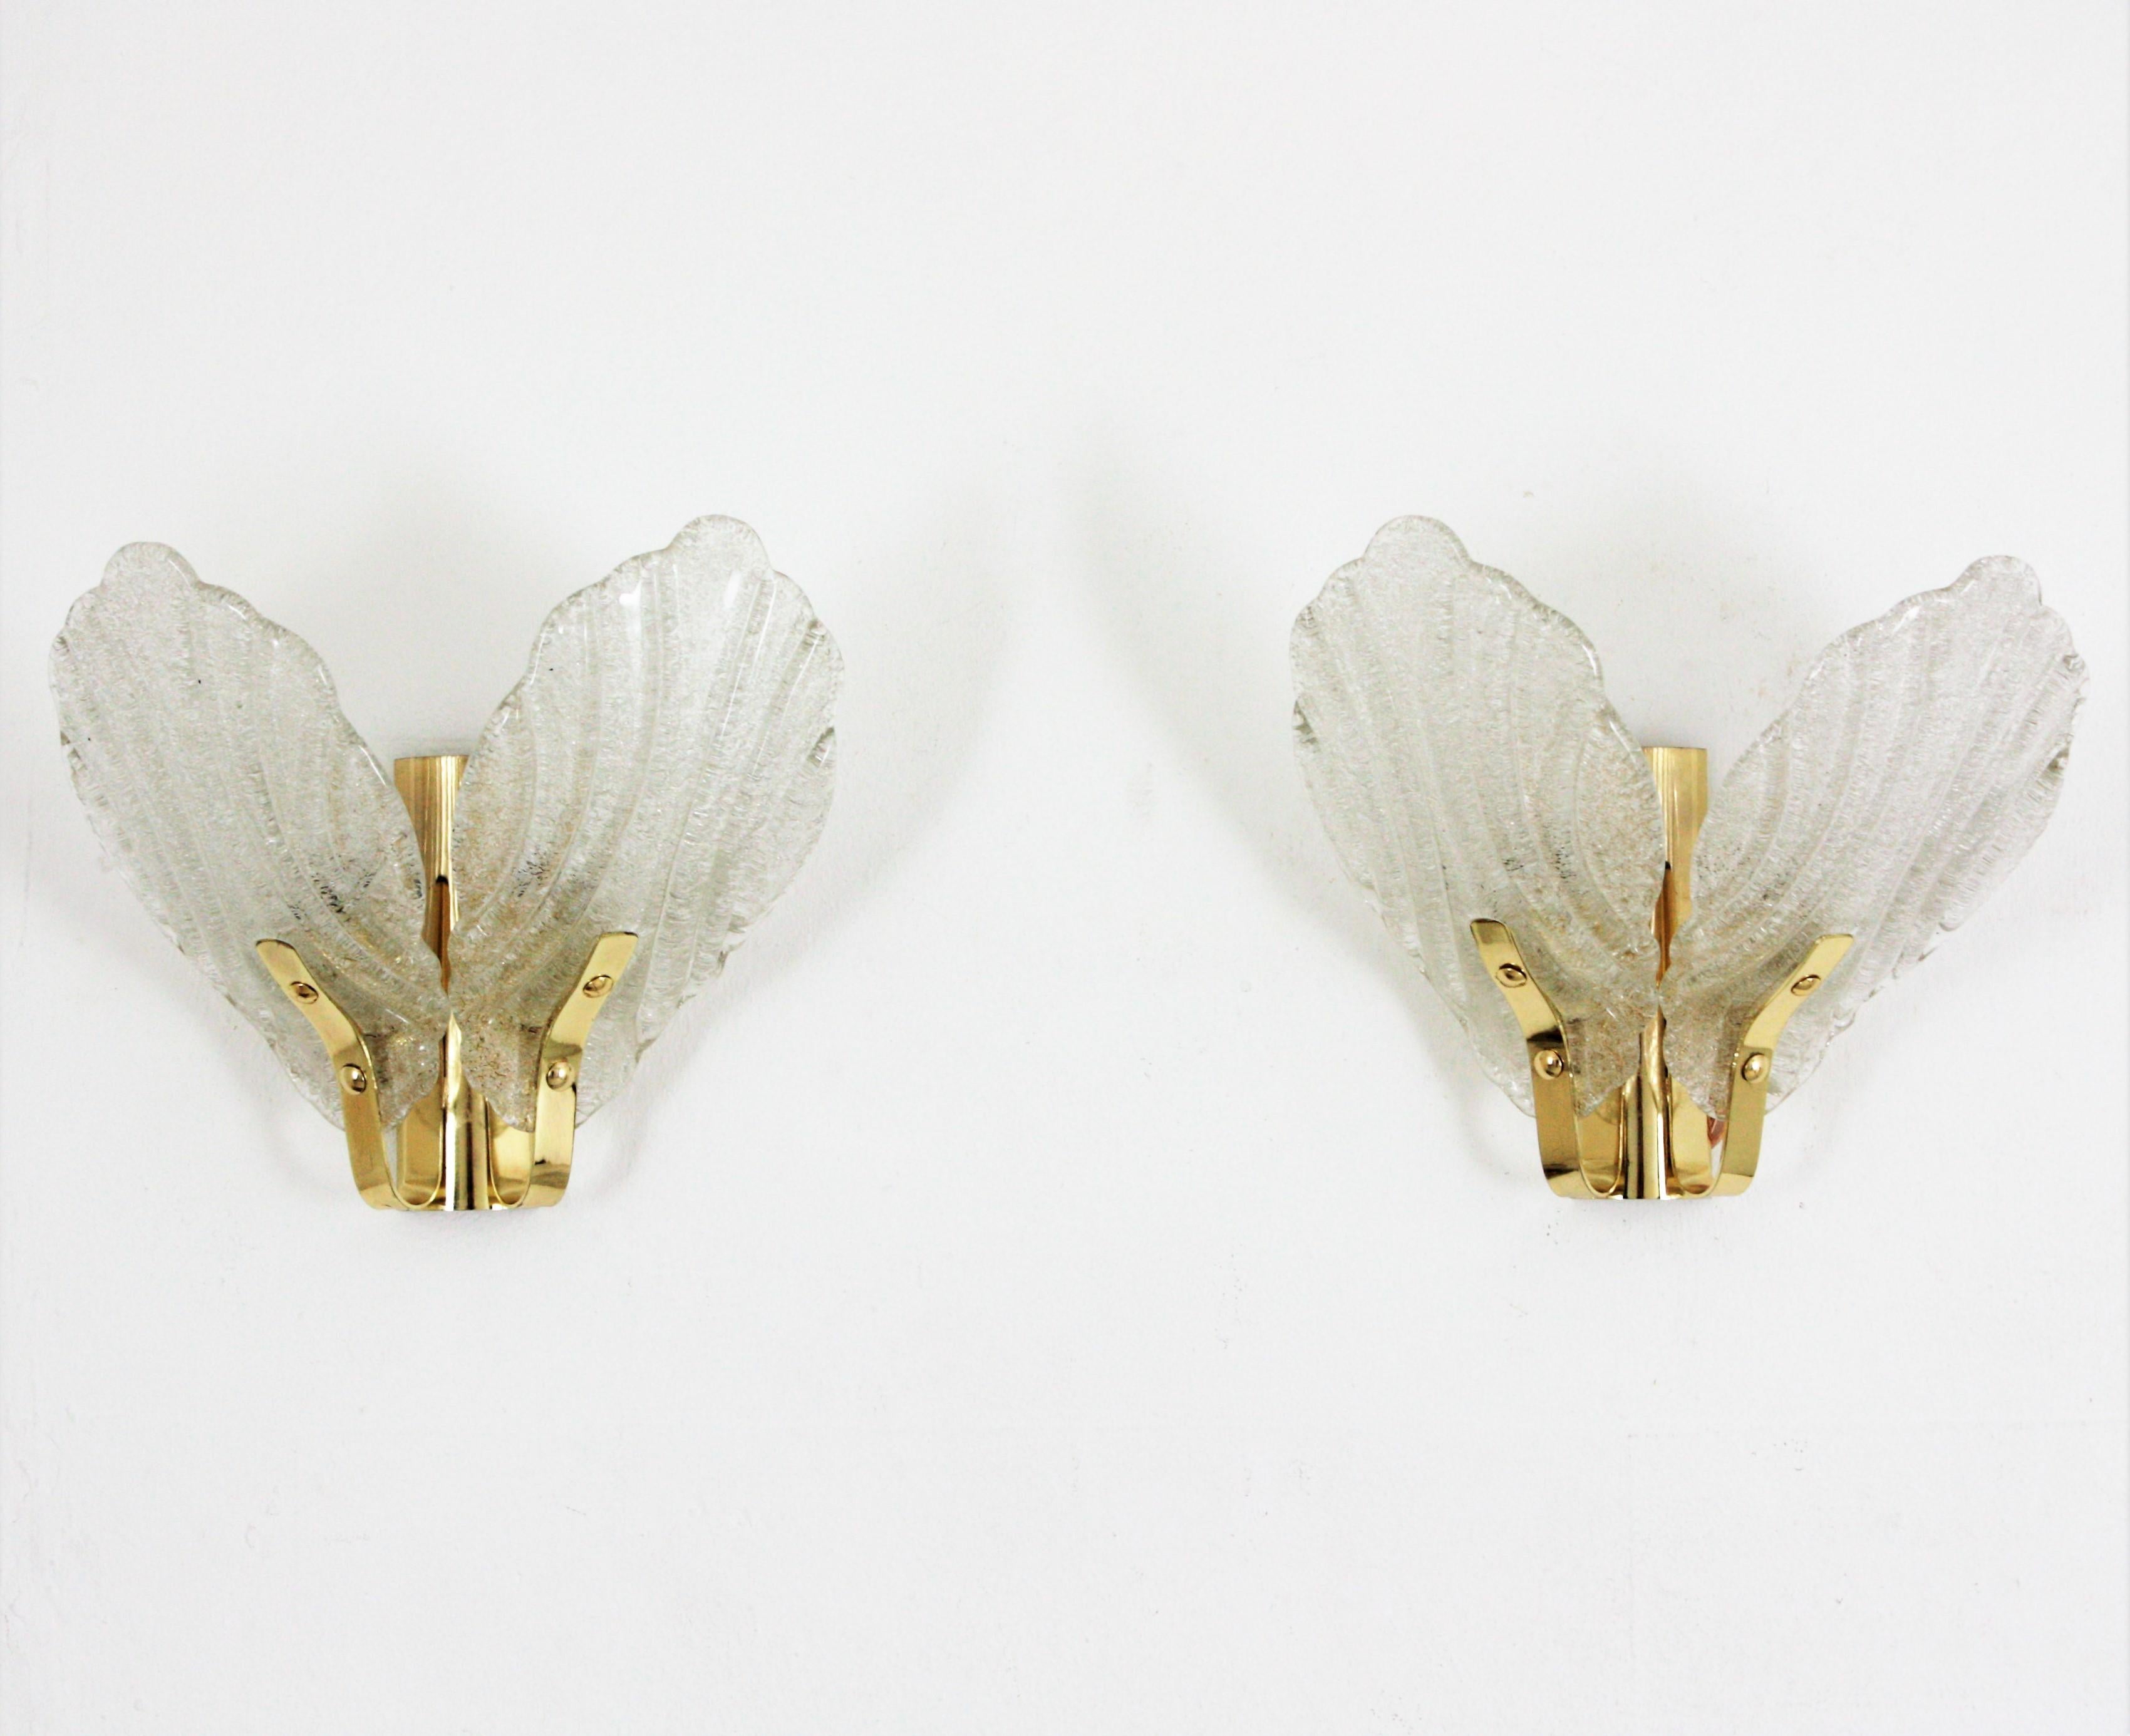 Swedish Modern, Orrefors Fagerlund leaf design double wall lights, glass and brass. 
Designed by Carl Fagerlund and produced in Sweden at the 1960s by the iconic firm of Orrefors. 
Two wall lights with two arms holding leaves glass shades and